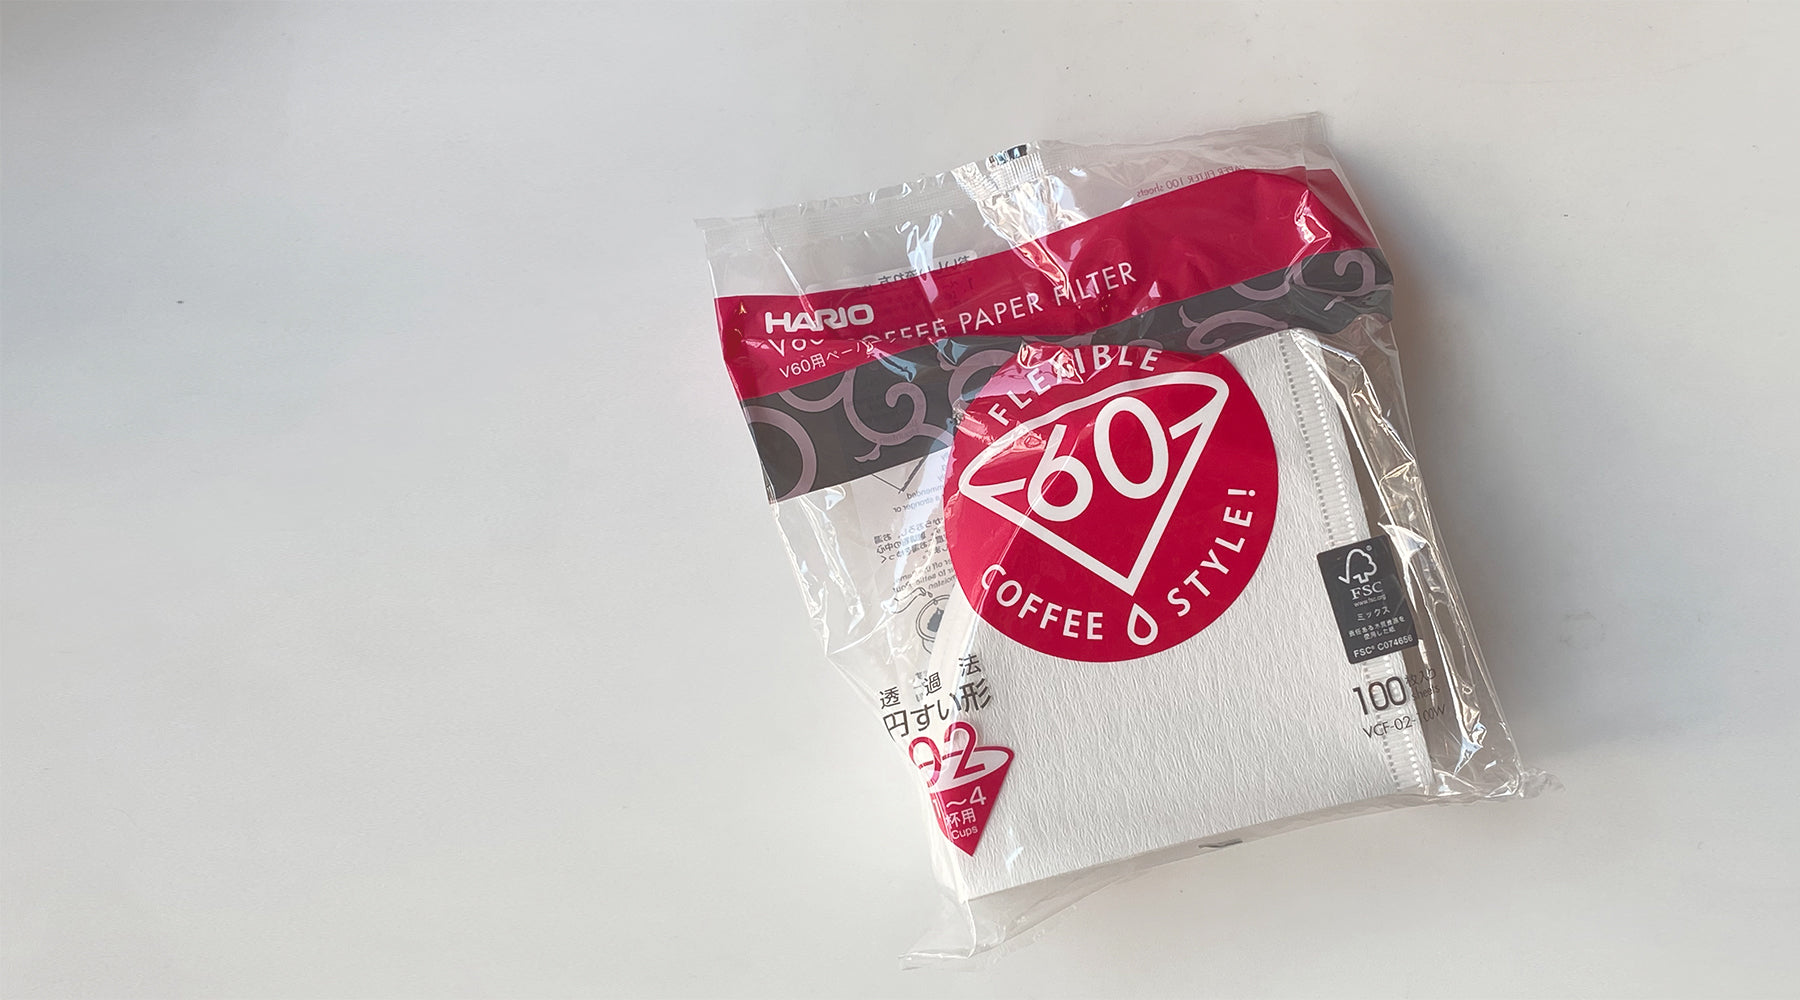 Hario V60 filter papers